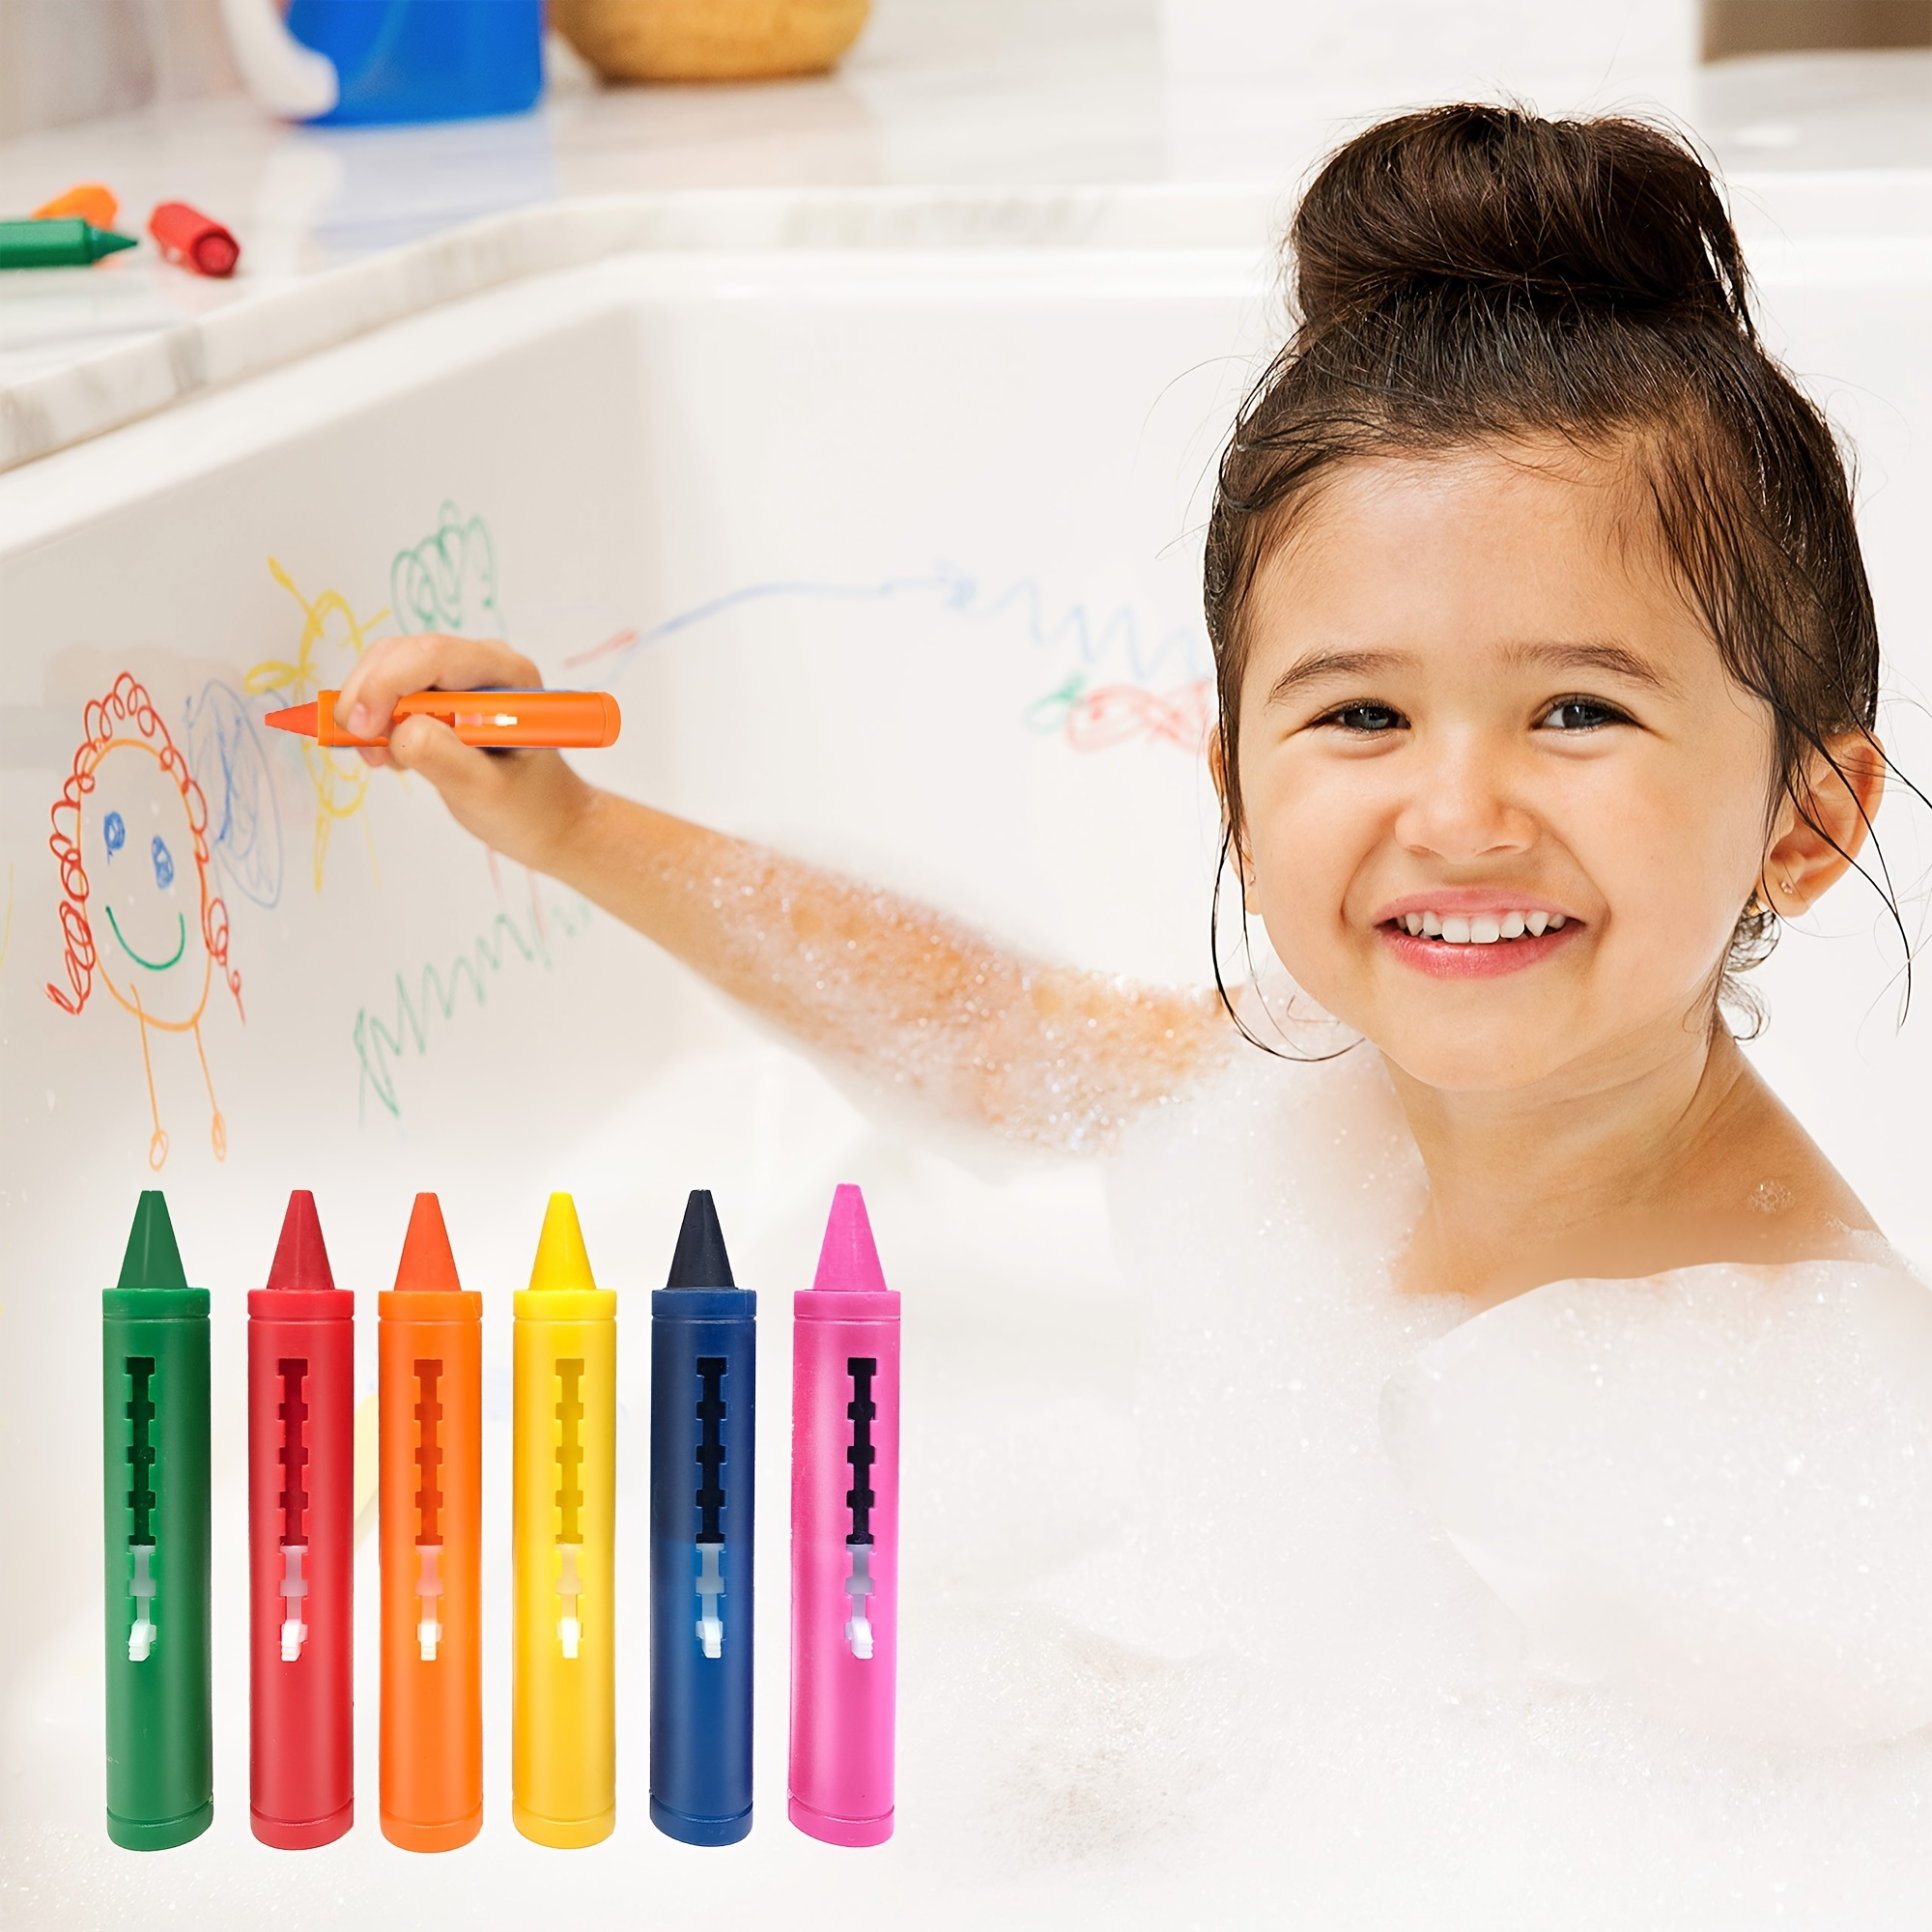 6pcs Bath Crayons Set Bathtub Crayons Washable Easy Clean Bath Time Crayons  Colorful Bathtub Markers Toys Shower Crayons Bath Paint For Toddlers Kids  Face Body Makeup Party Putter Crayon